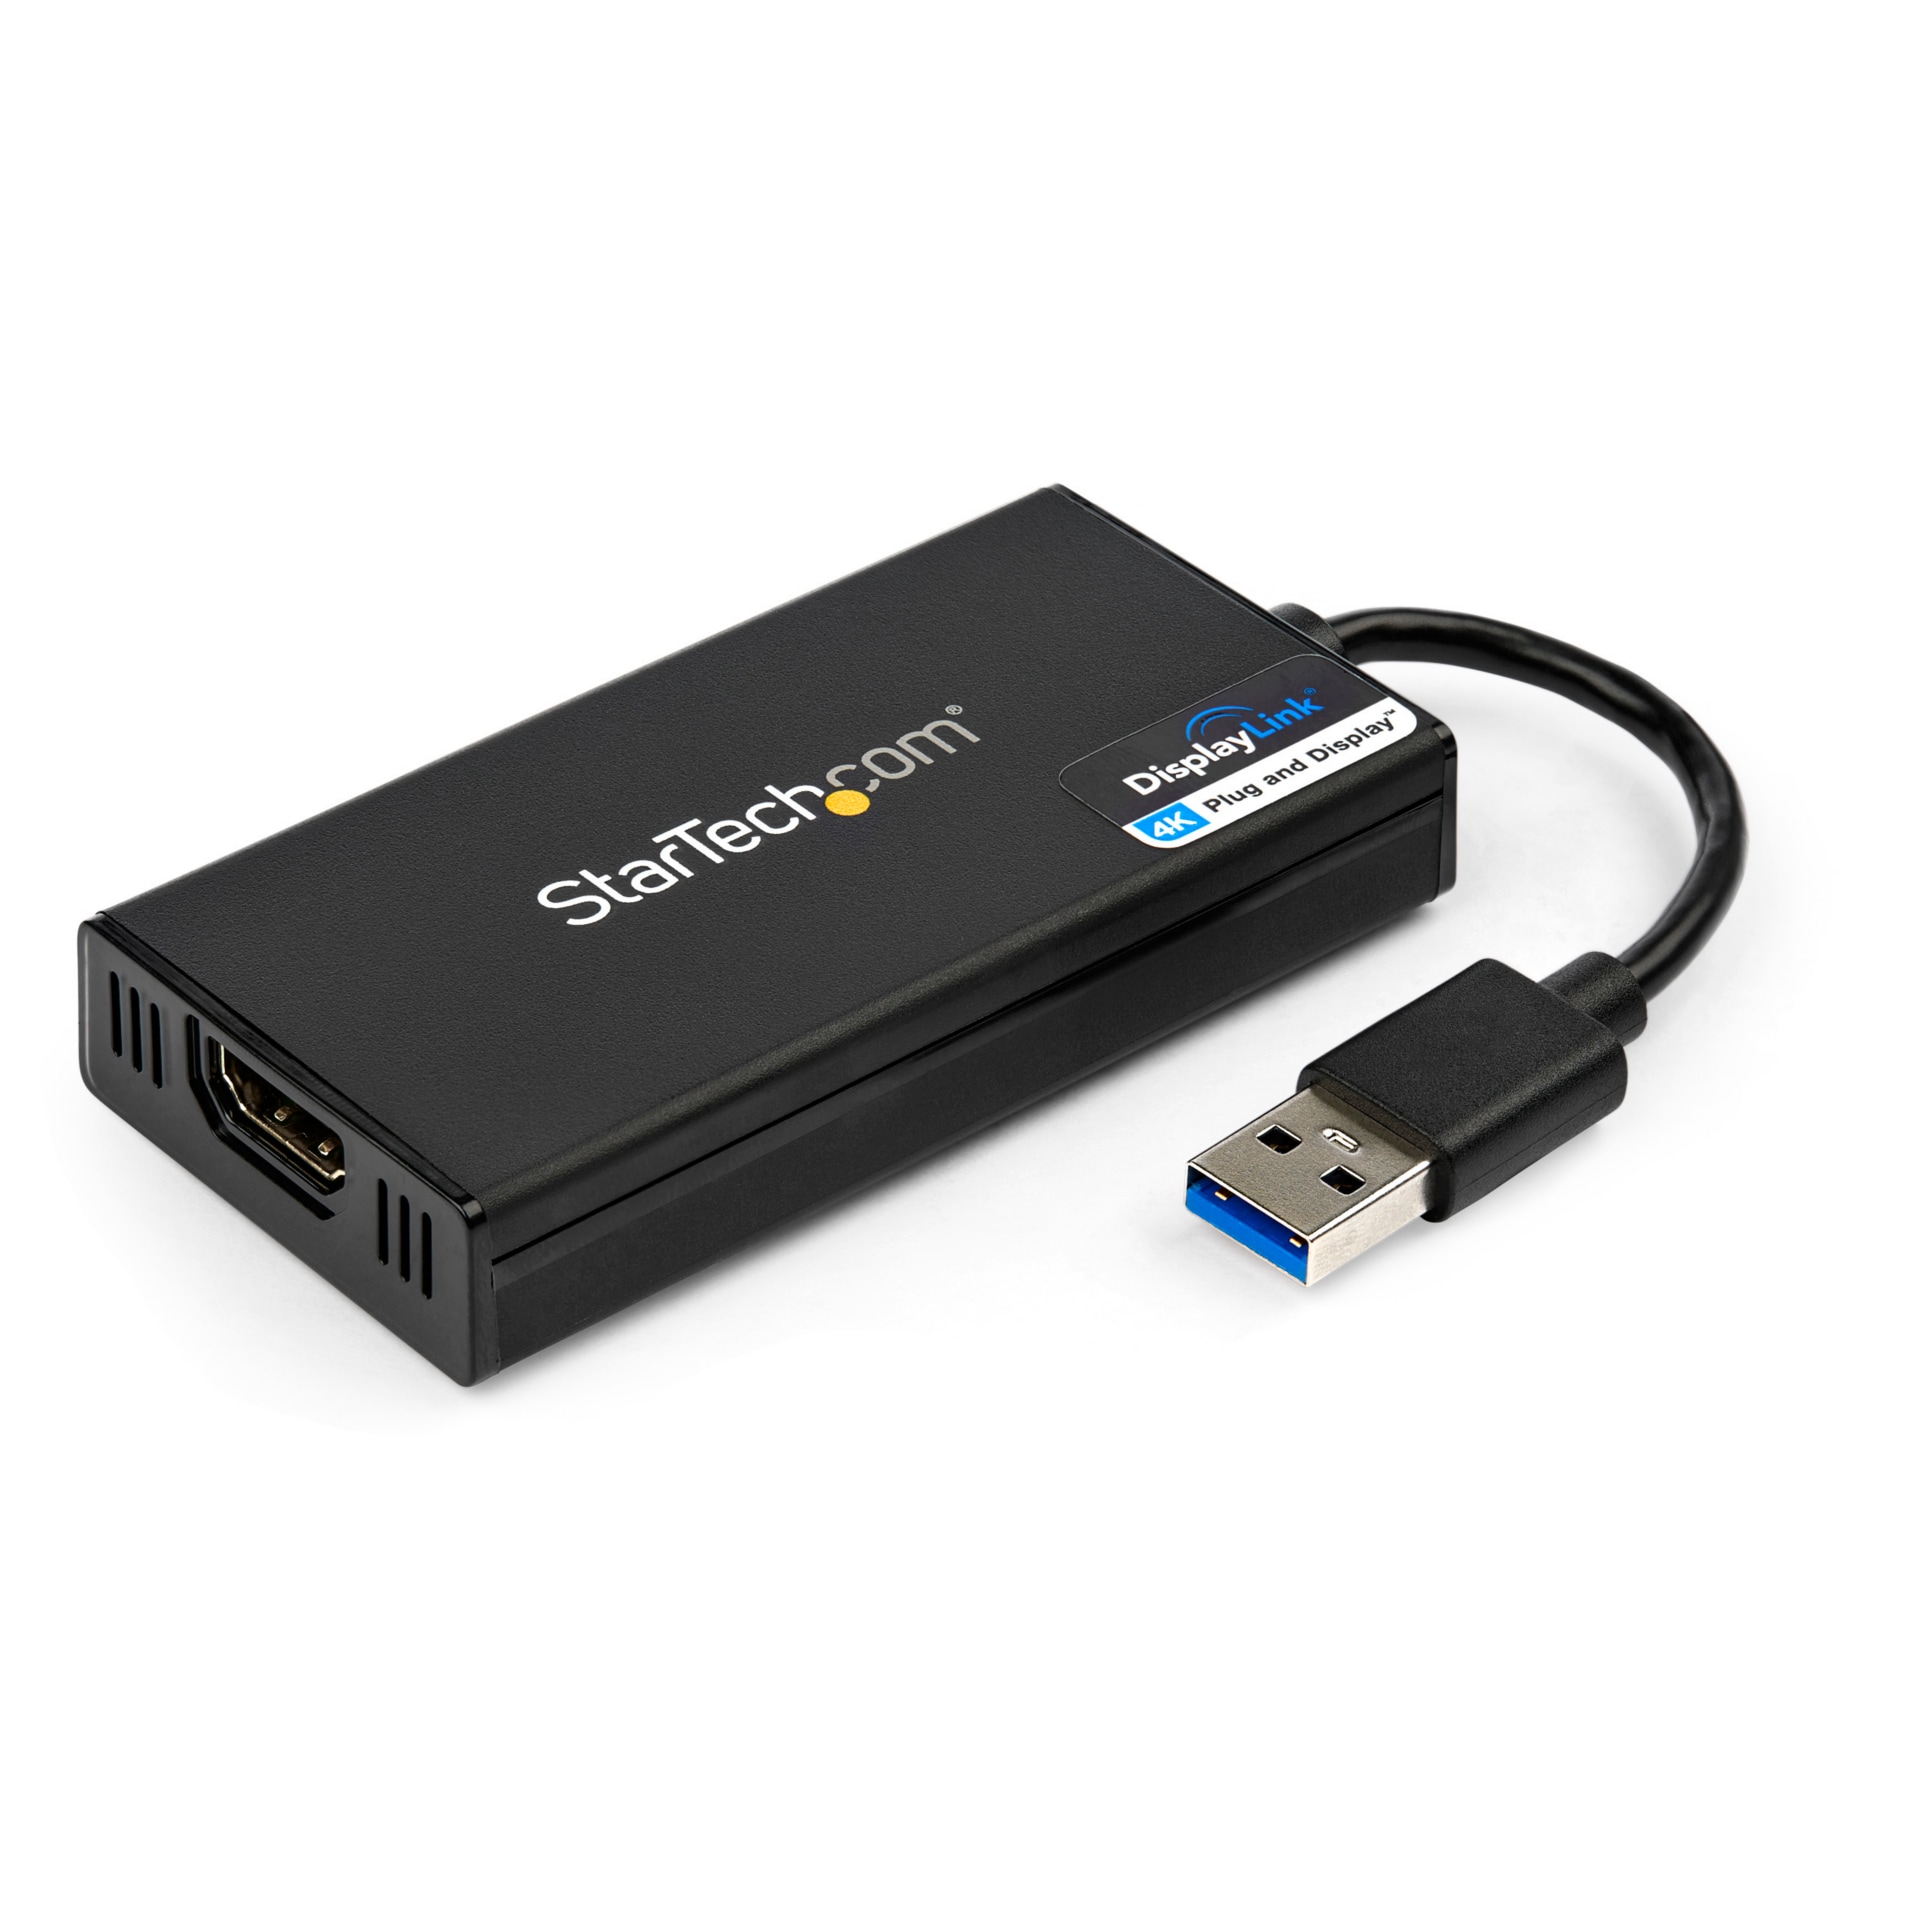 StarTech.com USB 3.0 HDMI Adapter 4K 40Hz DisplayLink Certified - External Video Graphics - USB32HD4K - Monitor Cables & Adapters - CDW.com